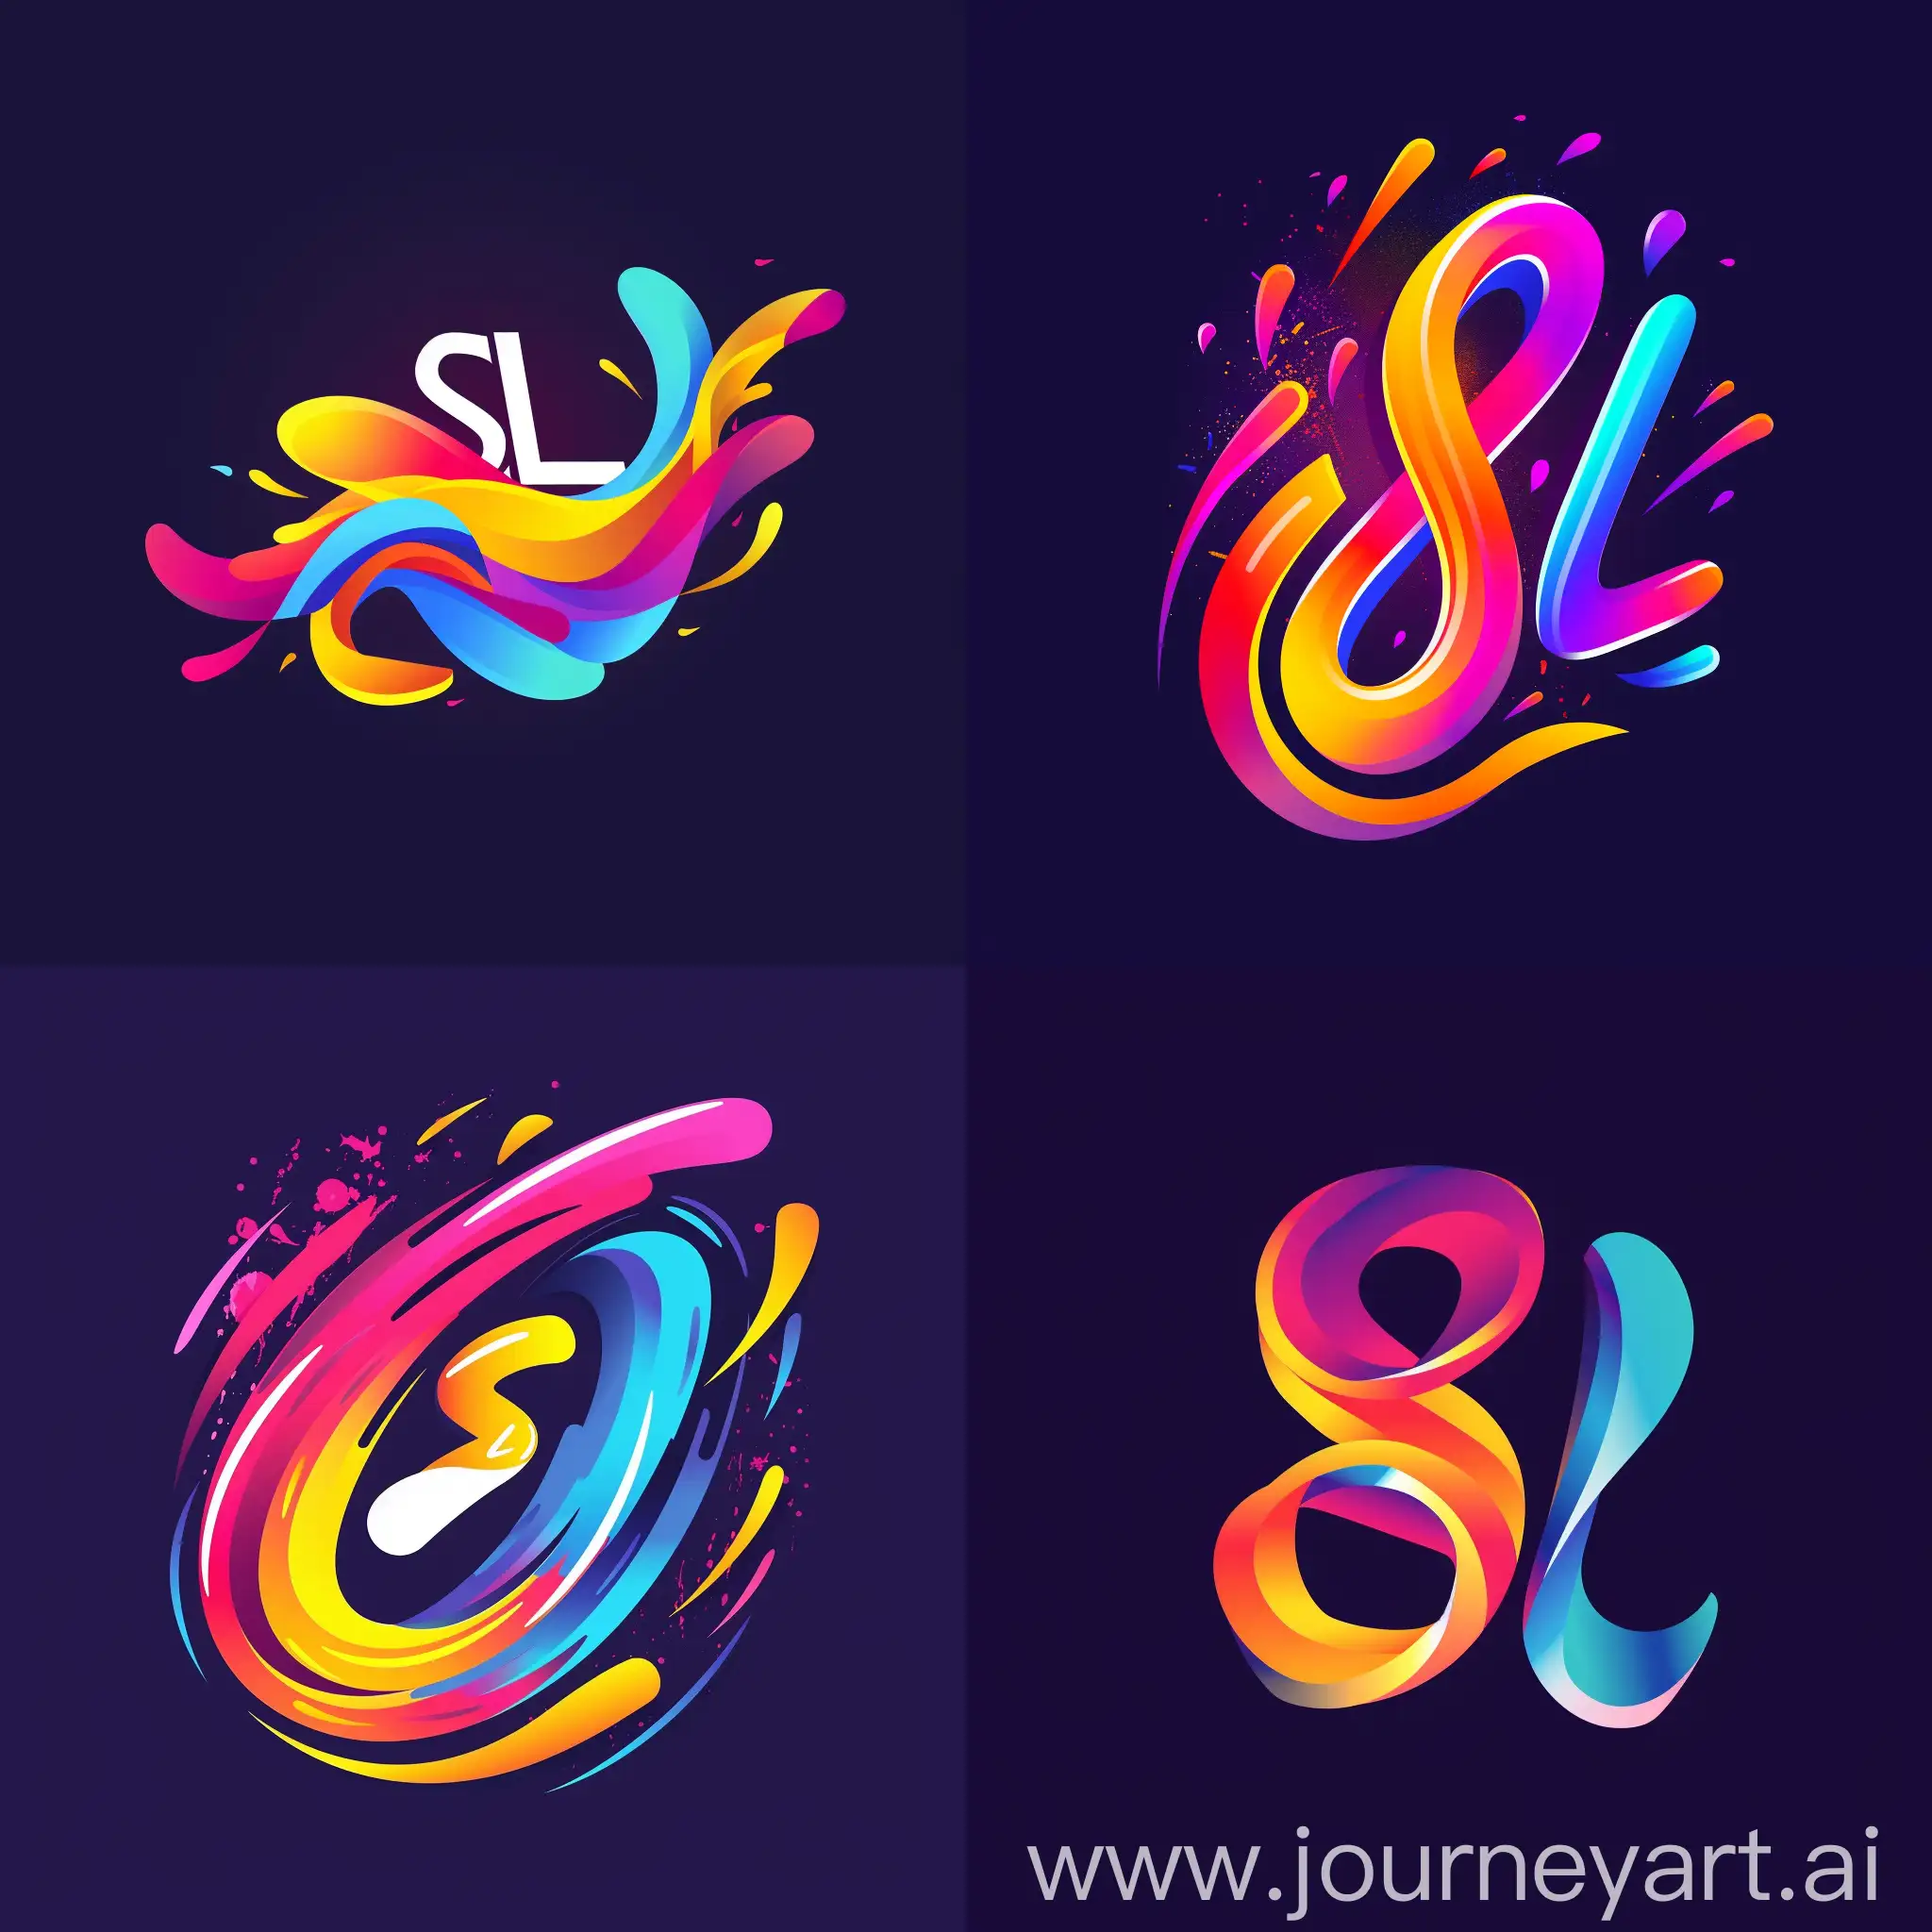 Vibrant-Logo-Design-Abstract-SL-Symbol-with-Bright-Colors-and-Dynamic-Forms